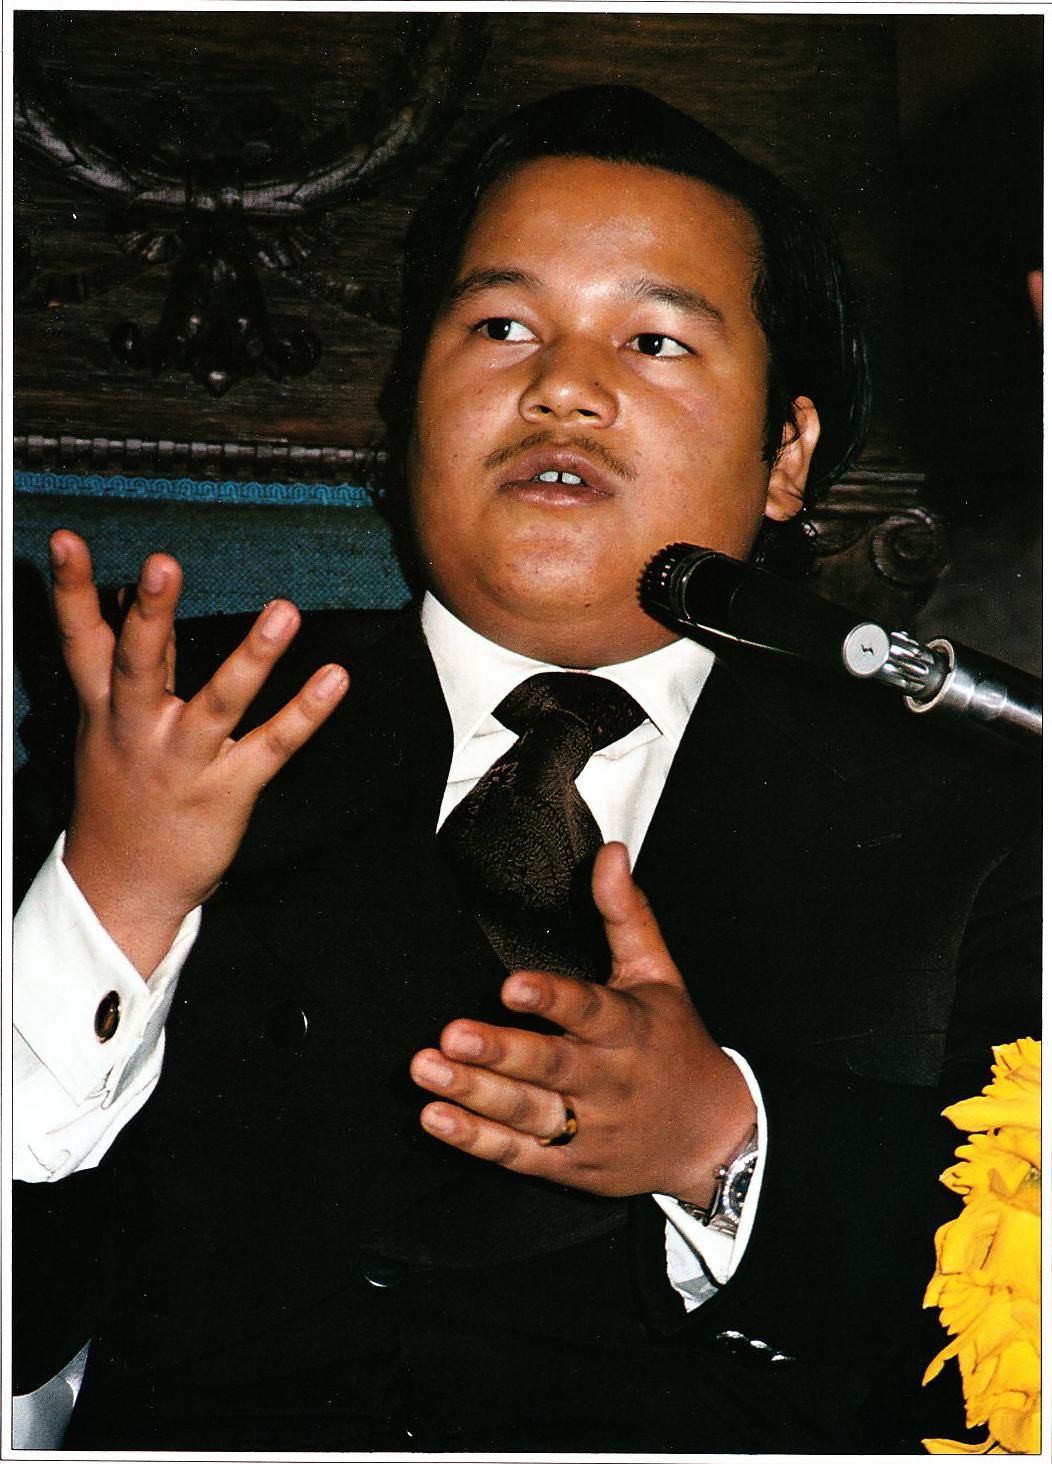 Prem Rawat aka Maharaji in 1974 When He Was The Lord of the Universe